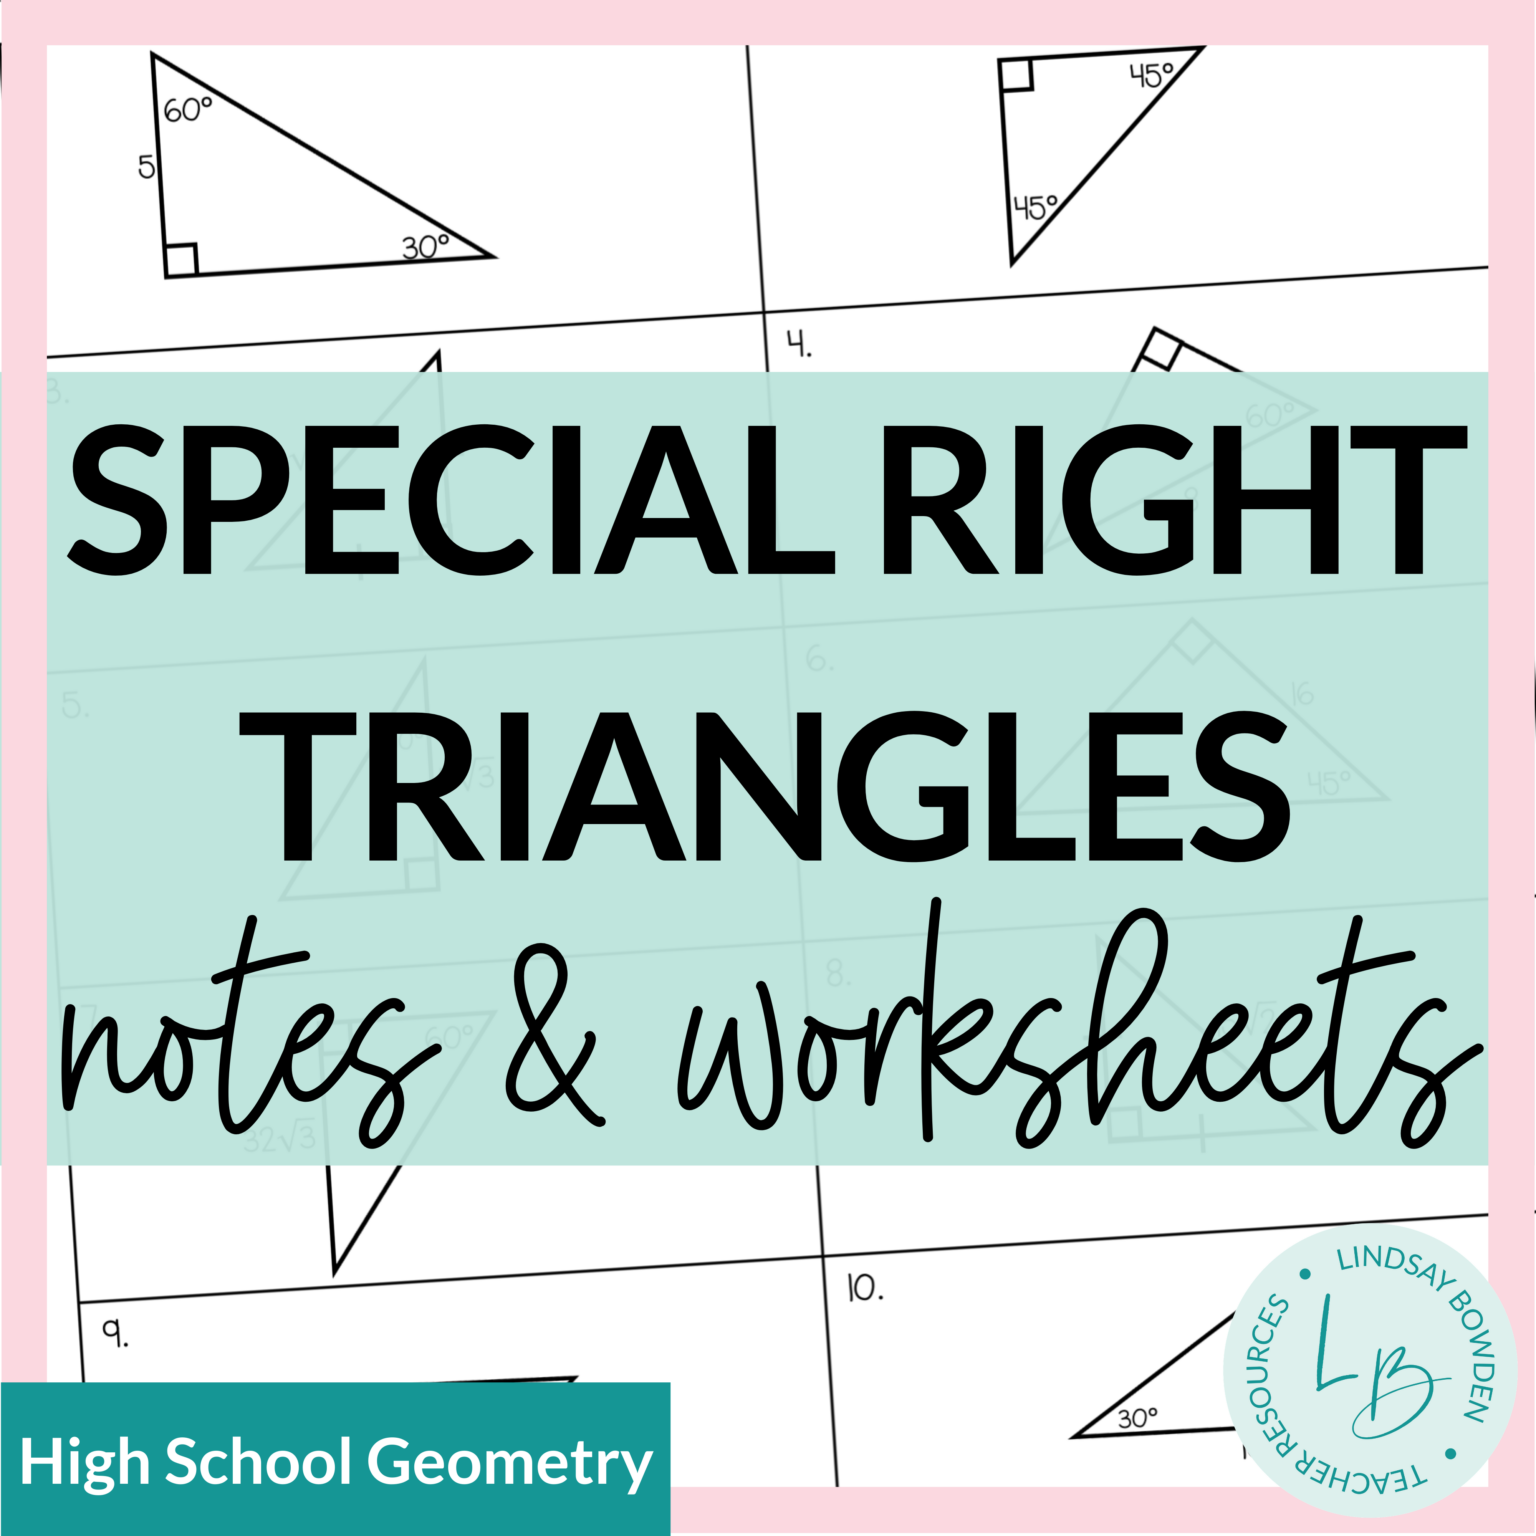 Special Right Triangles Notes And Worksheets Lindsay Bowden 9842